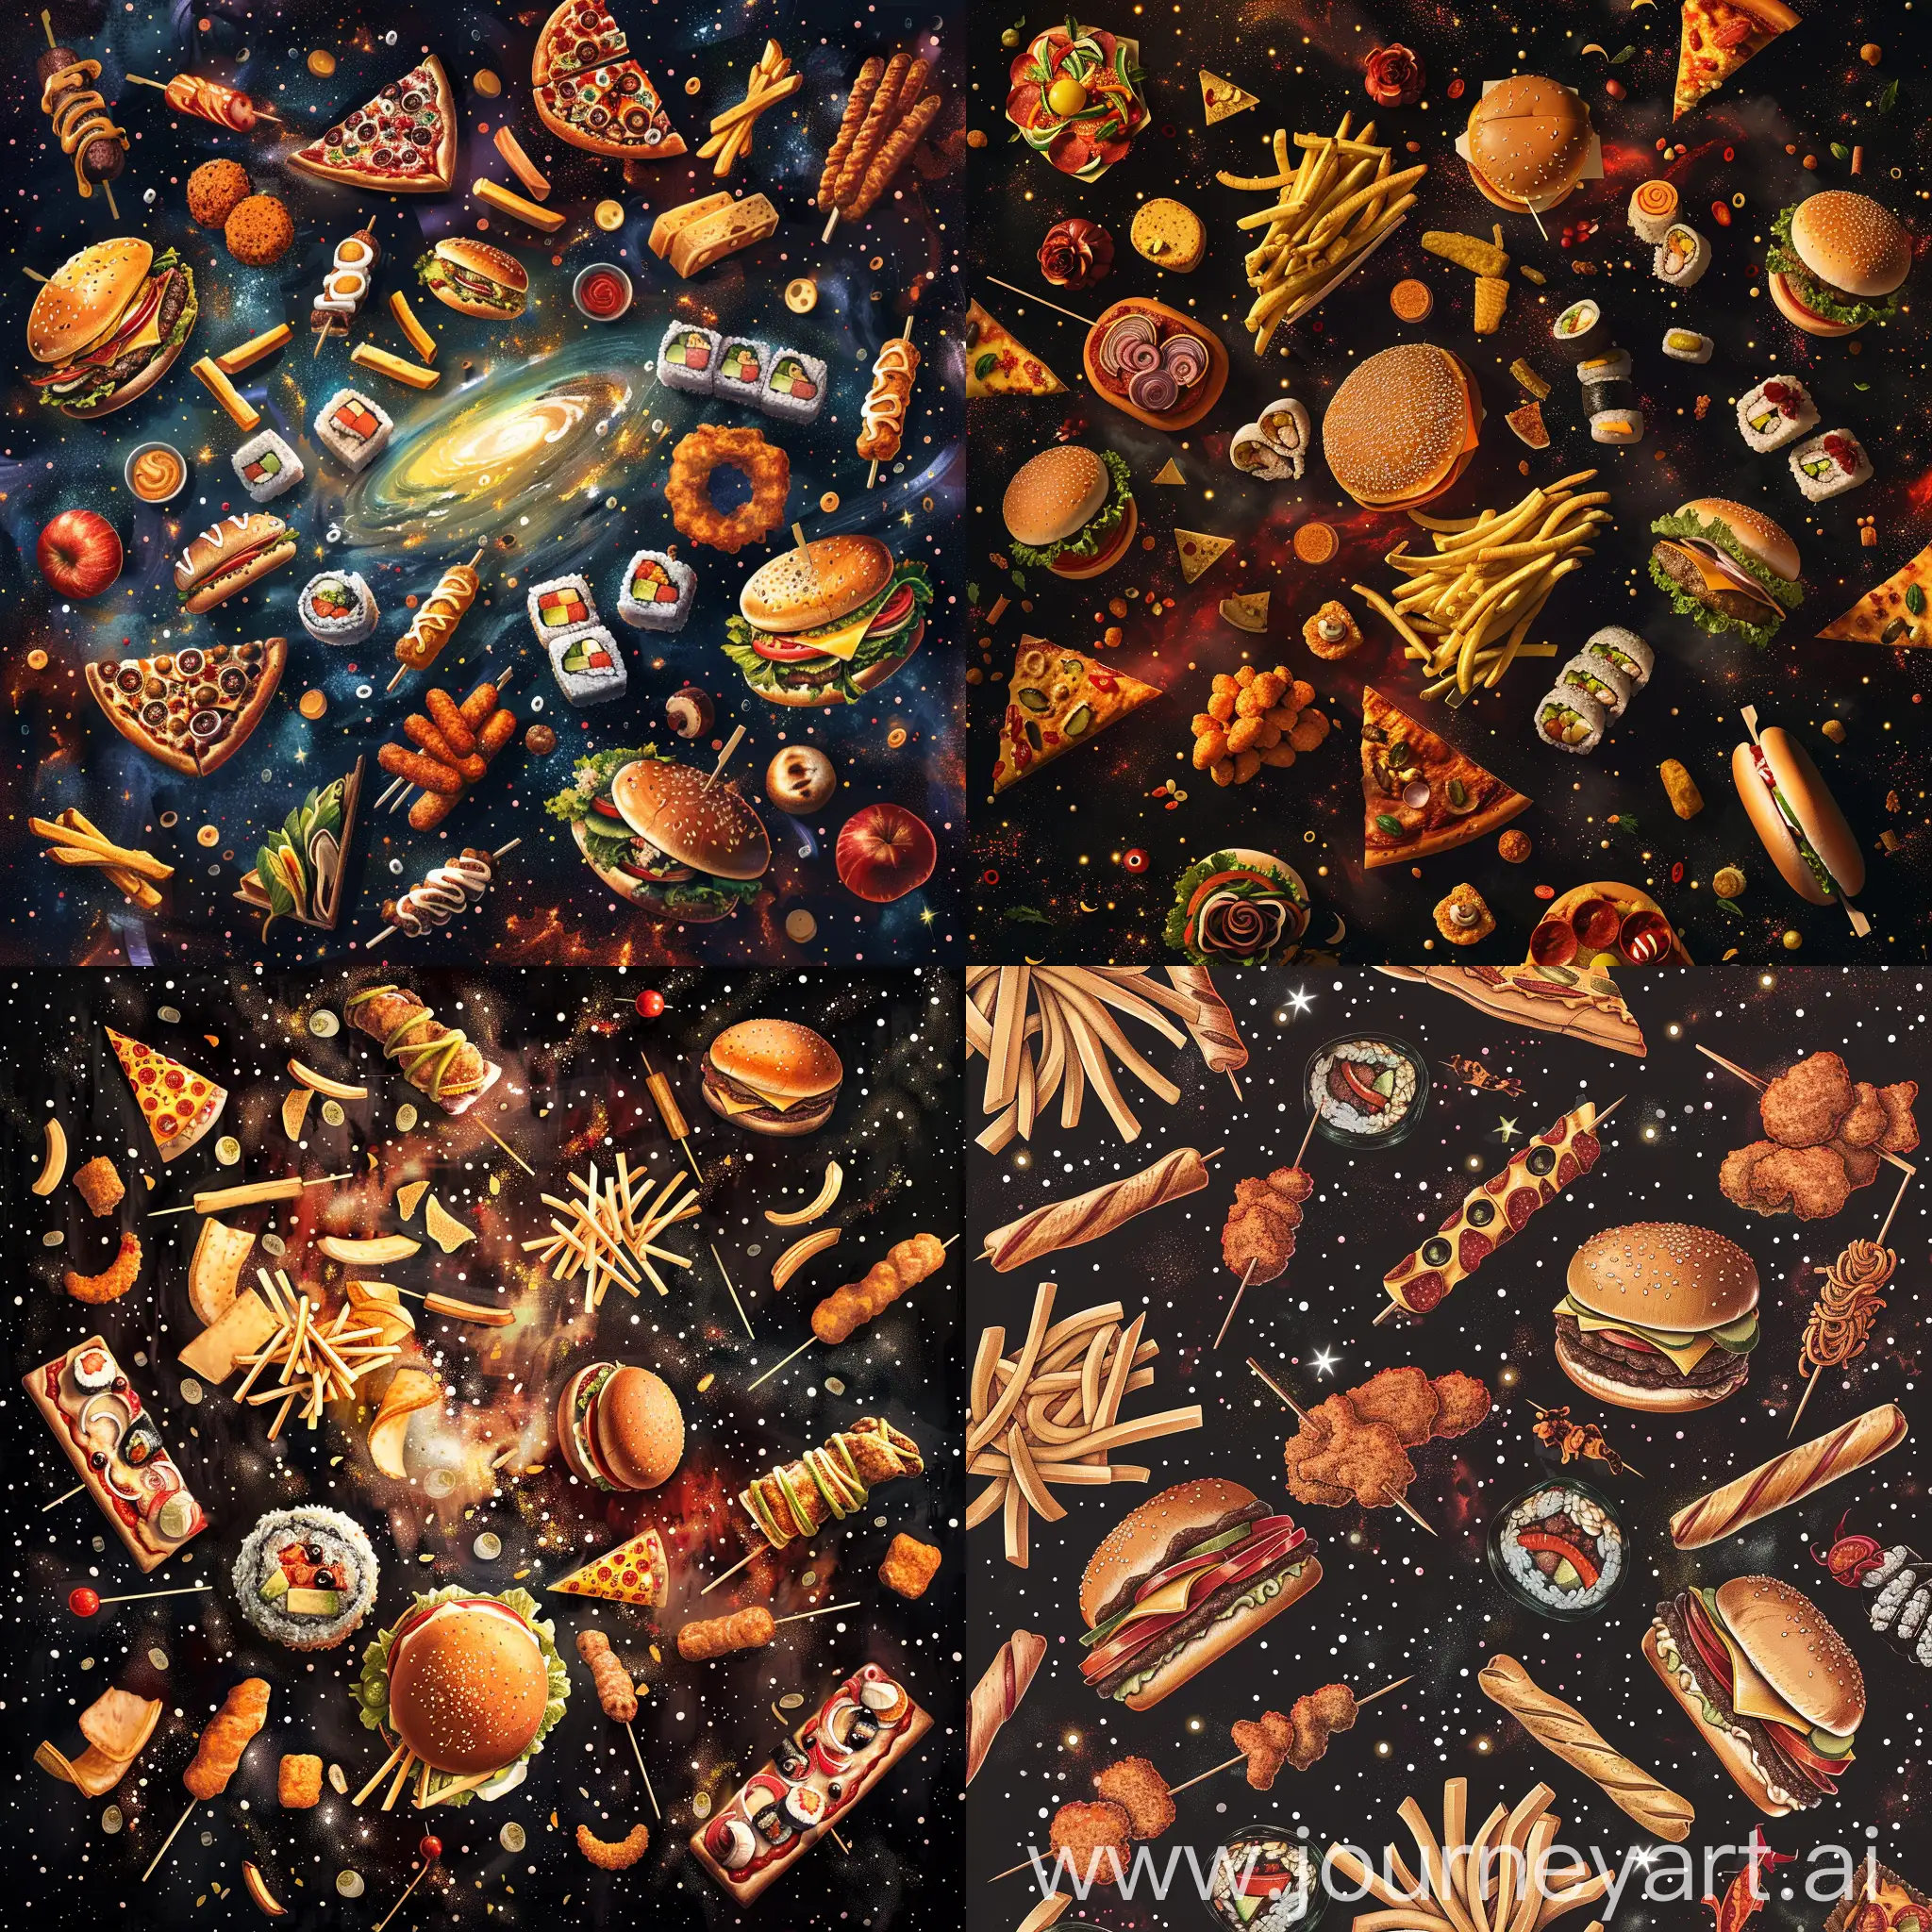 Cosmic-Feast-Galaxy-of-Burgers-Pizza-Sushi-Rolls-and-More